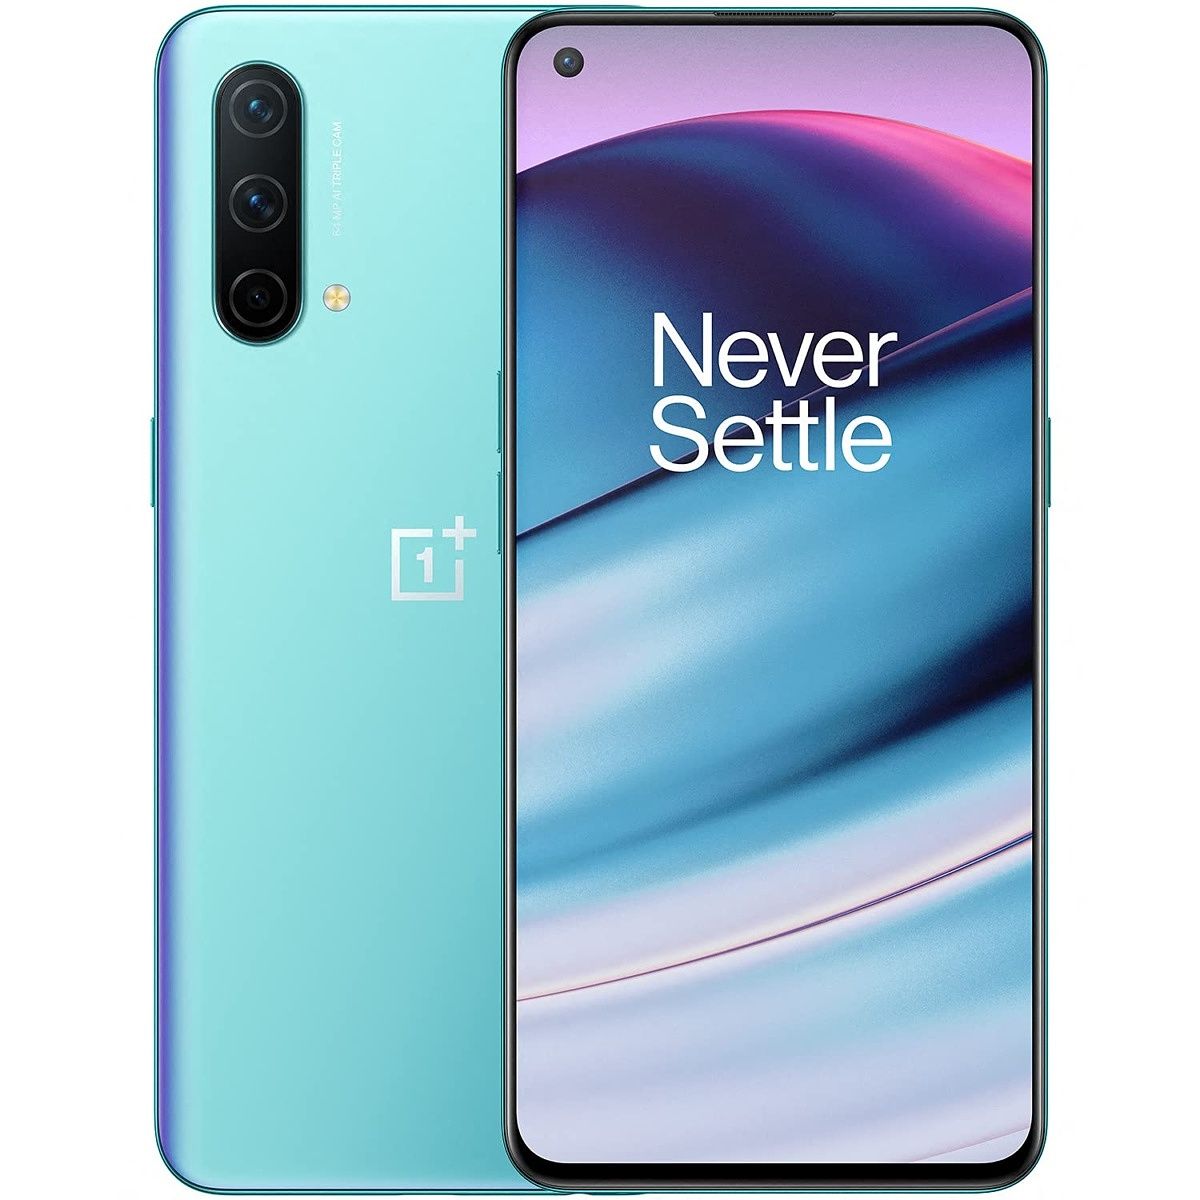 The OnePlus Nord CE 5G combines a beautiful 6.43-inch AMOLED 90Hz display wih the powerful Snapdragon 750G chipset. 